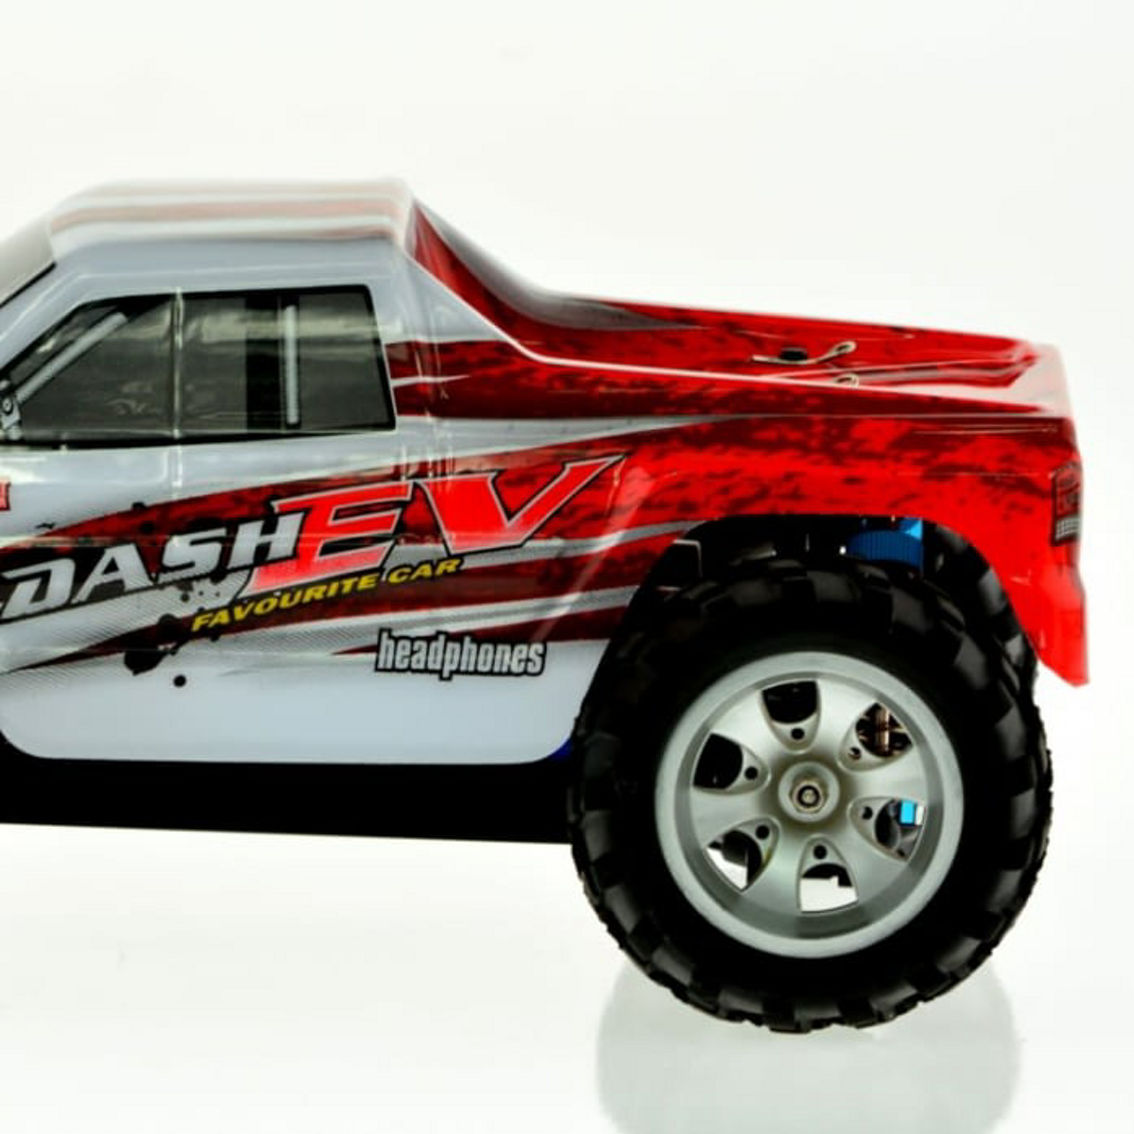 CIS-A979-B 1:16 scale monster truck with 450 feet range 45 MPH speed - Image 2 of 5